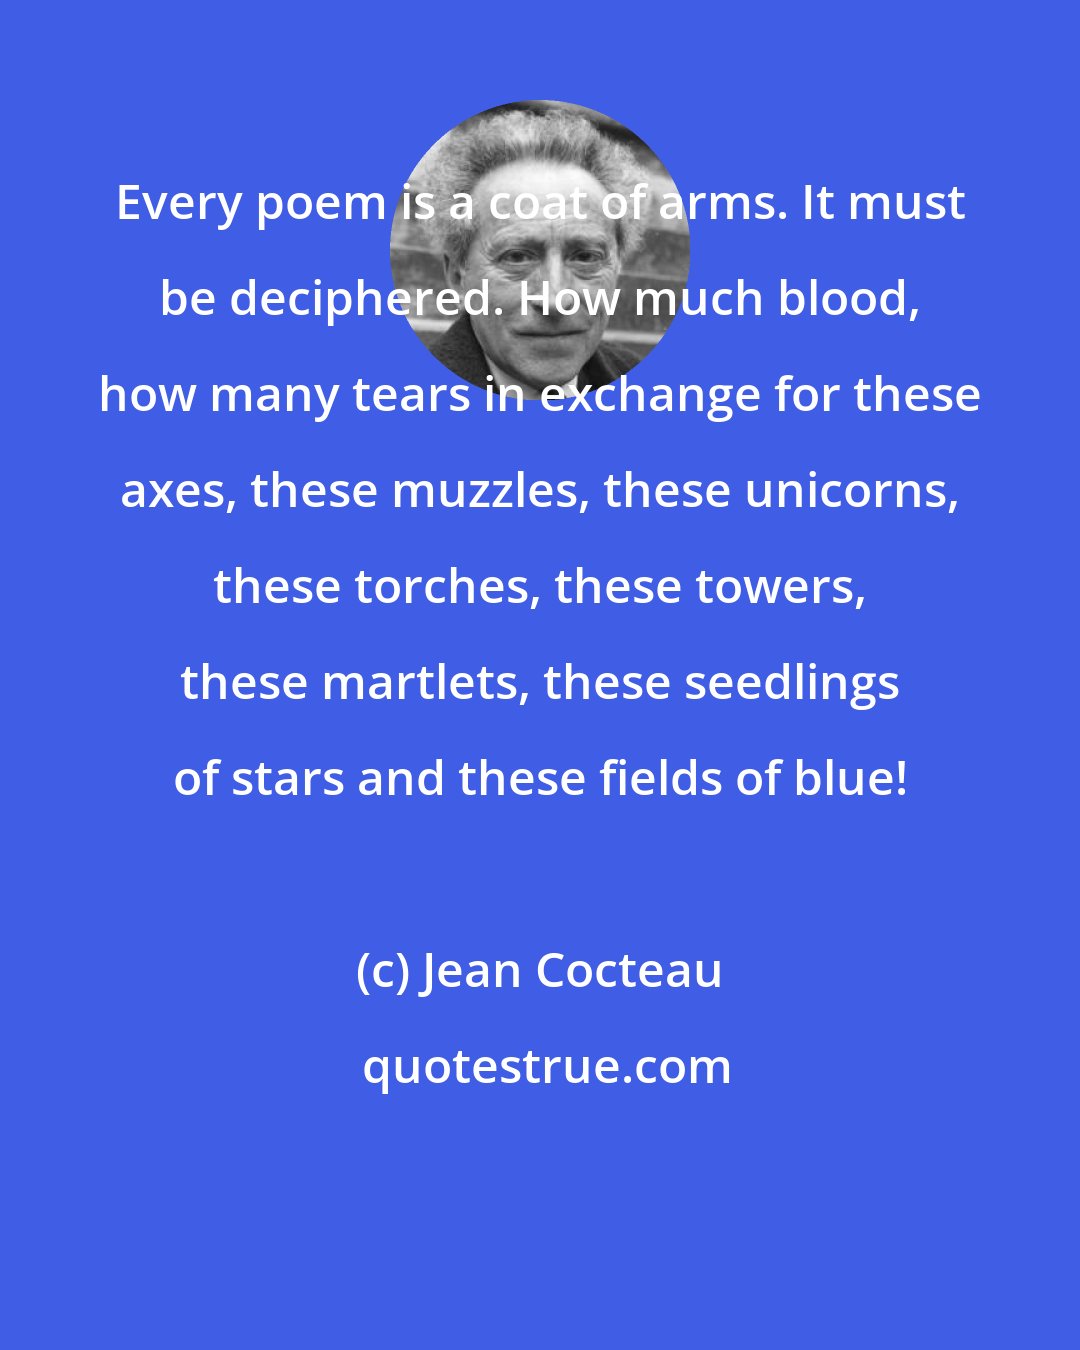 Jean Cocteau: Every poem is a coat of arms. It must be deciphered. How much blood, how many tears in exchange for these axes, these muzzles, these unicorns, these torches, these towers, these martlets, these seedlings of stars and these fields of blue!